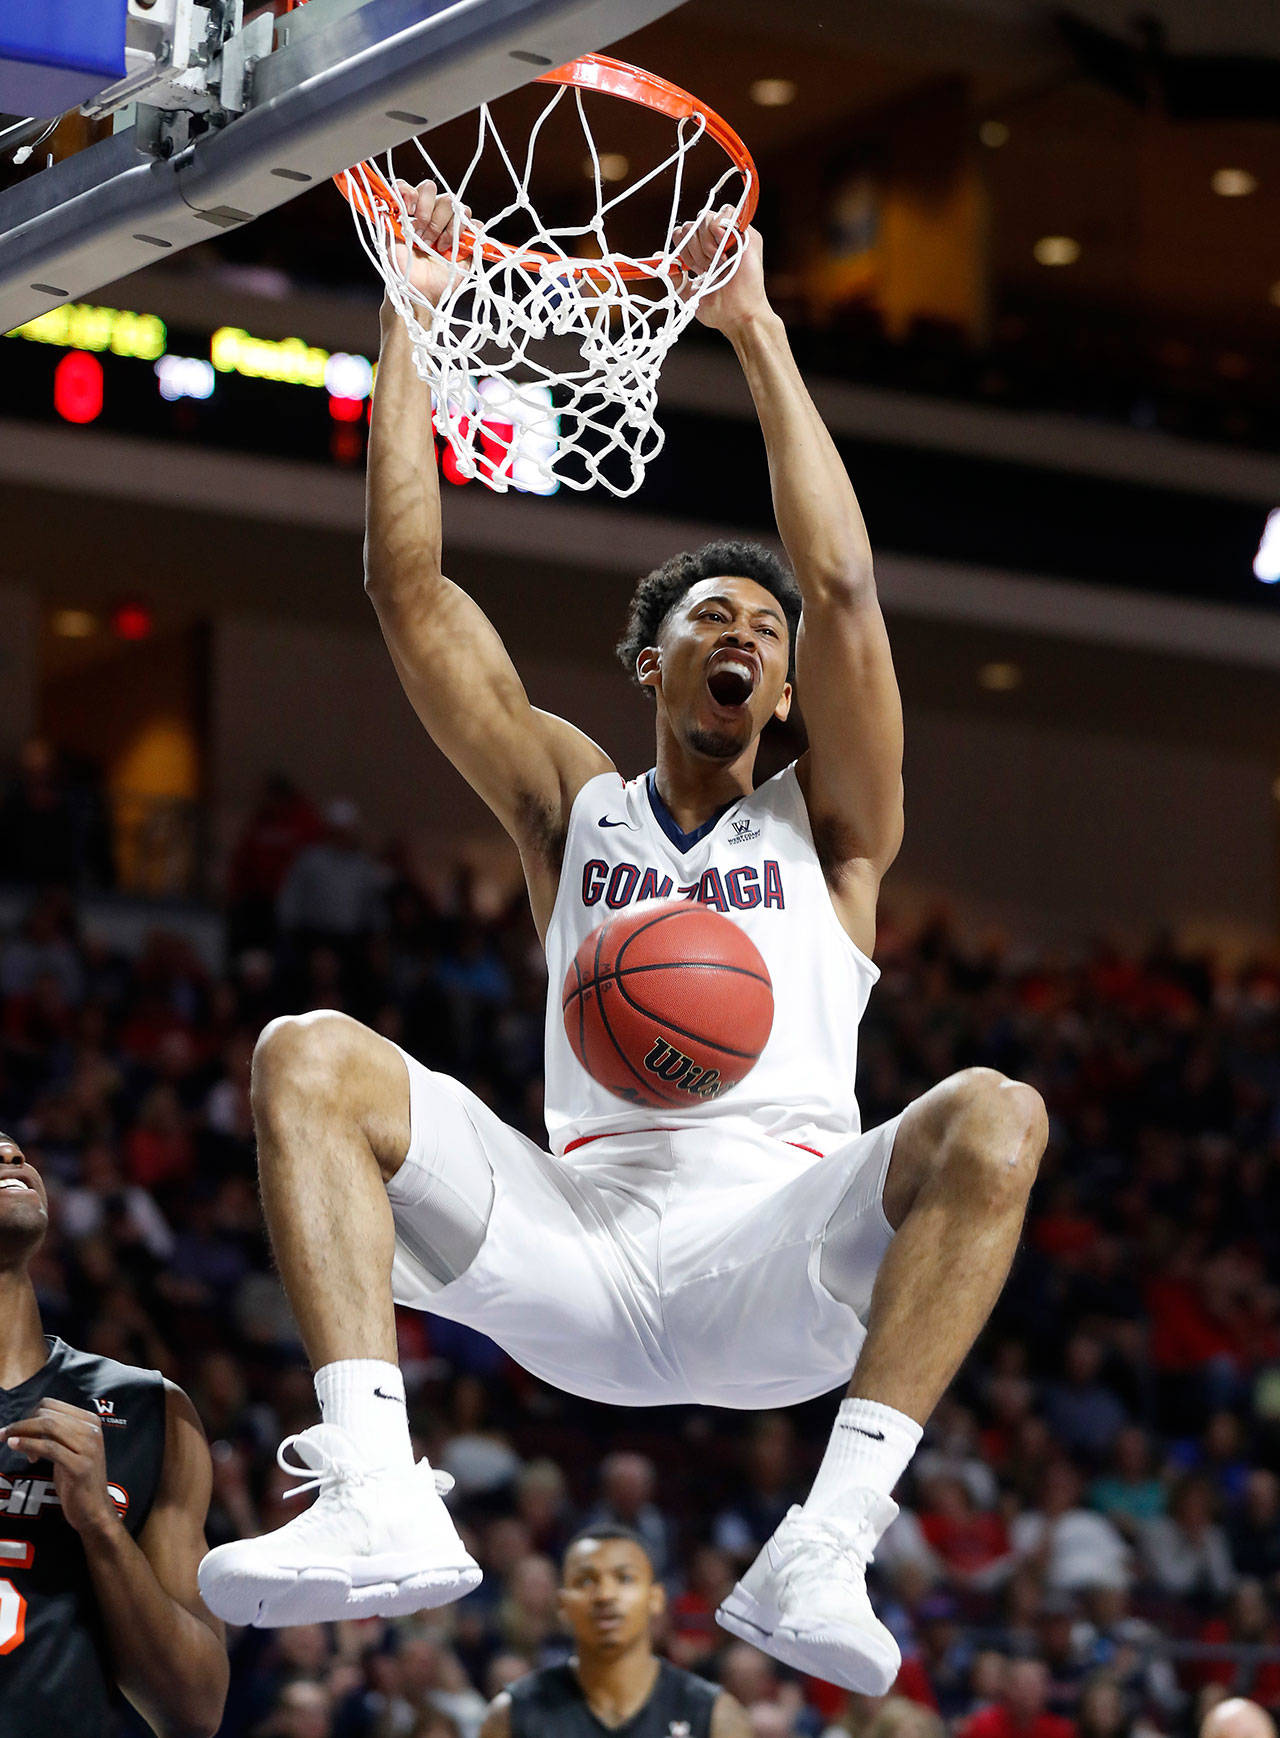 Gonzaga’s Johnathan Williams dunks during the first half of the team’s West Coast Conference tournament game against Pacific on March 4, 2017, in Las Vegas. (AP Photo/Isaac Brekken)